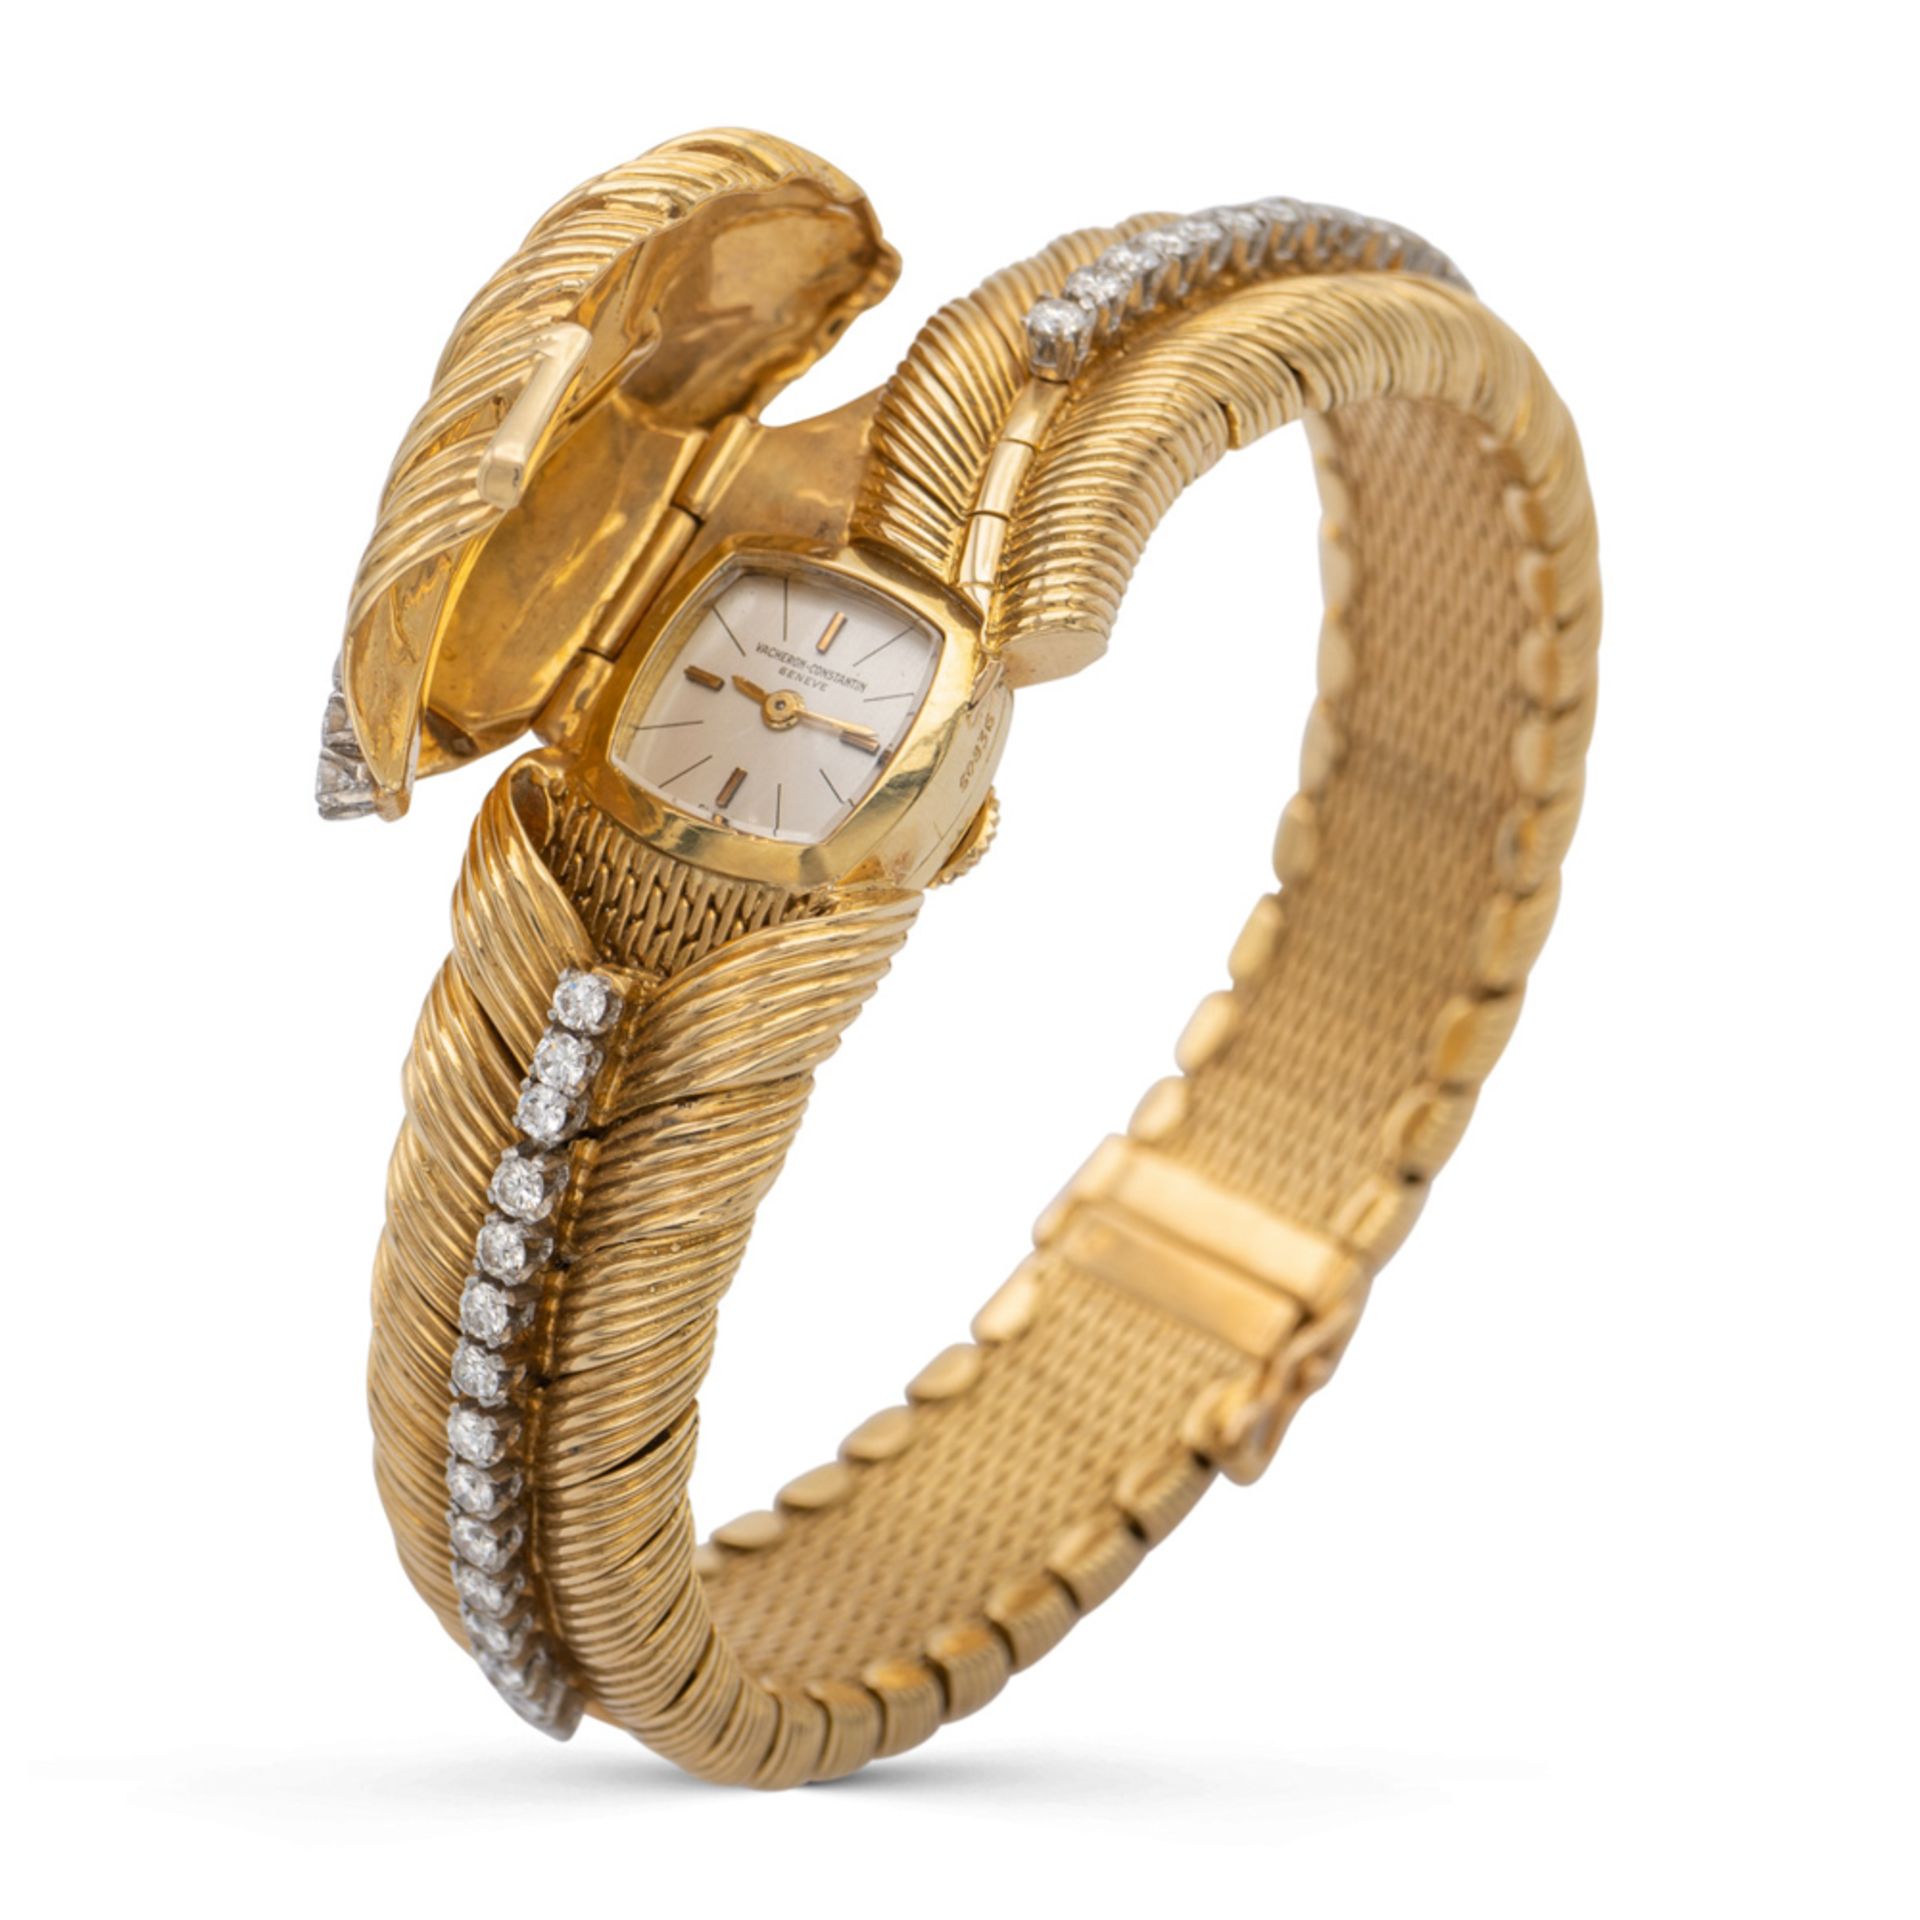 Vacheron & Constantin, 18kt yellow gold and diamond watch bracelet French marks, 1950/60s weight 69,